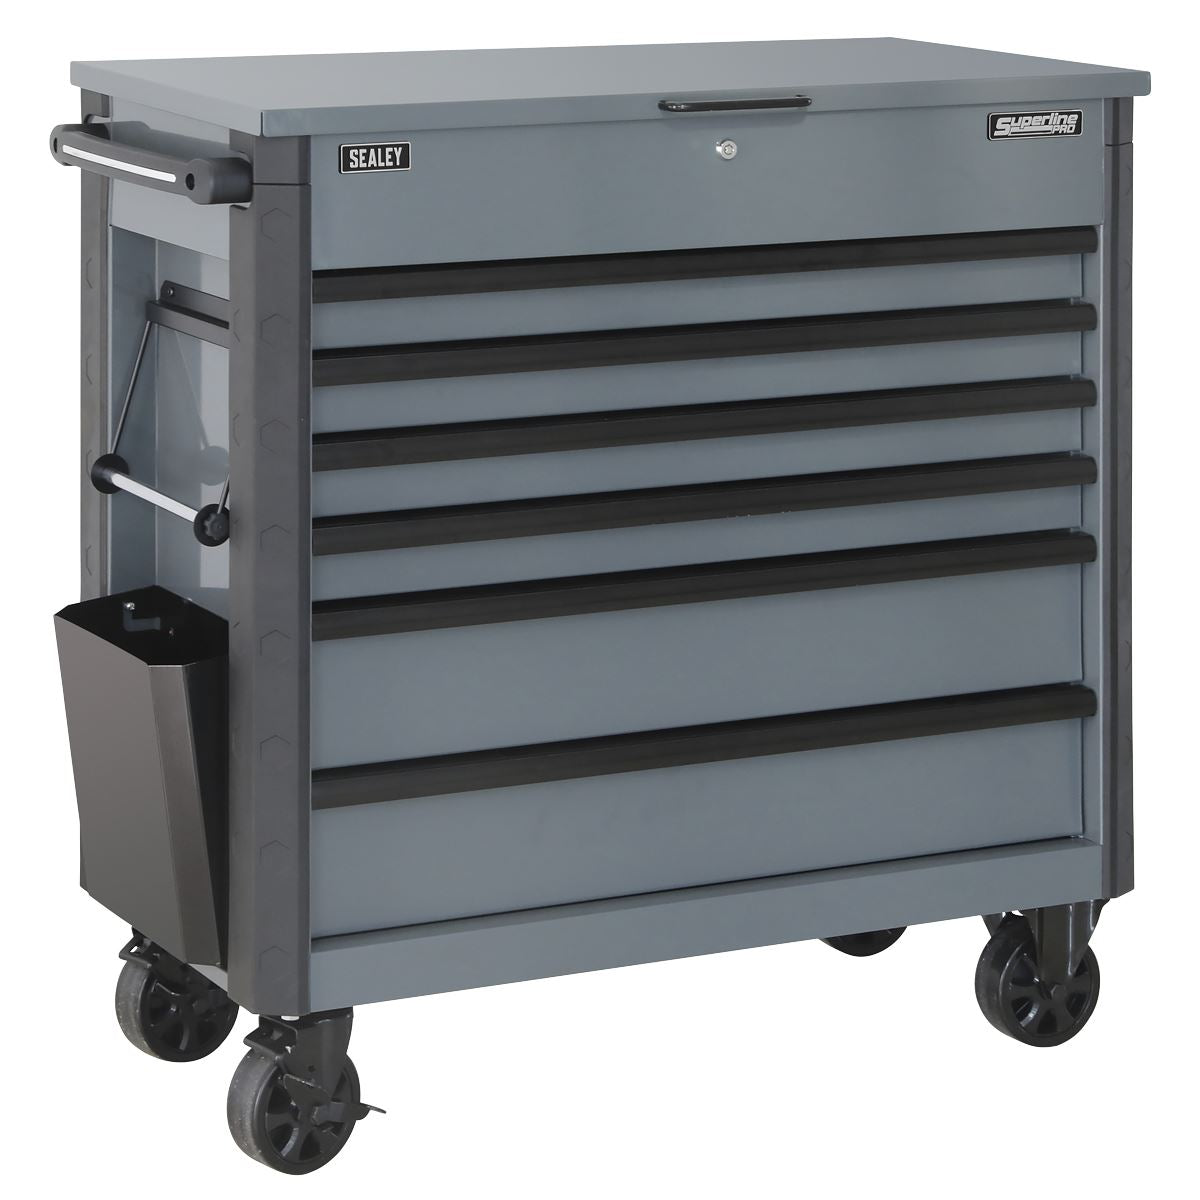 Sealey Superline Pro Tool Trolley 6 Drawer with Ball Bearing Slides - Grey